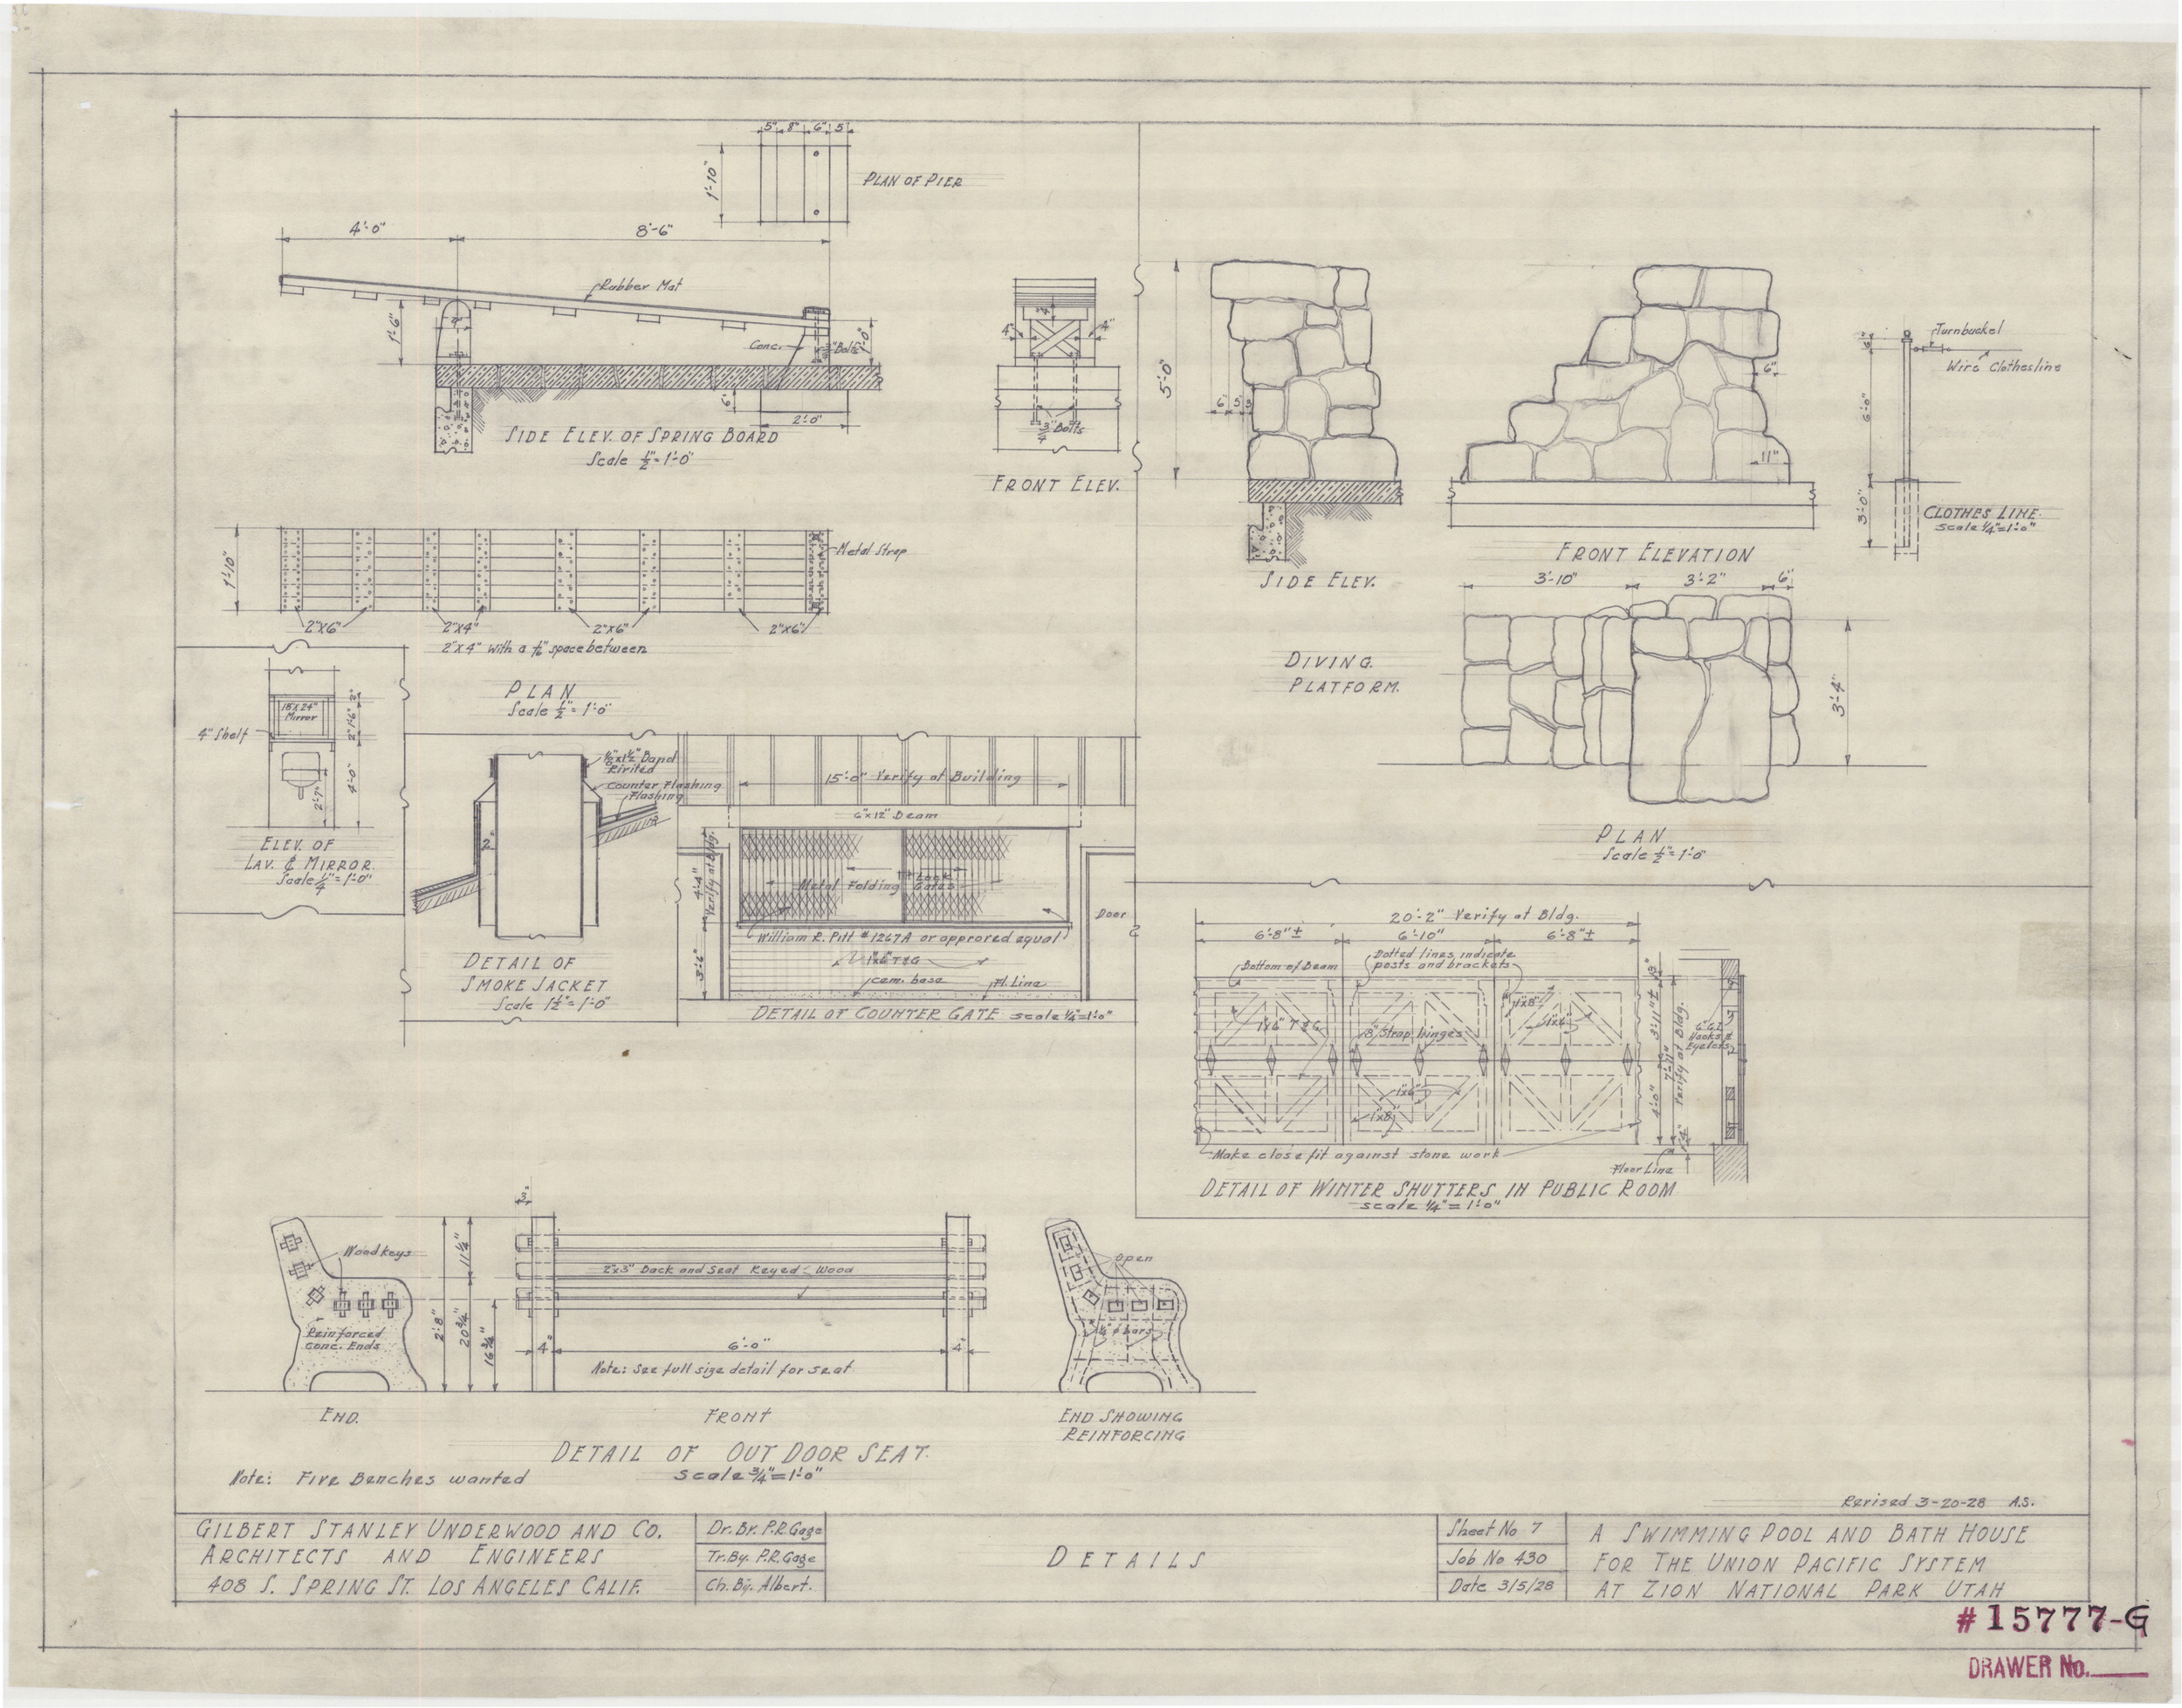 Architectural drawing of swimming pool & bath house at Zion National Park, Utah, floor plan, March 5, 1928, sheet no. 7, details